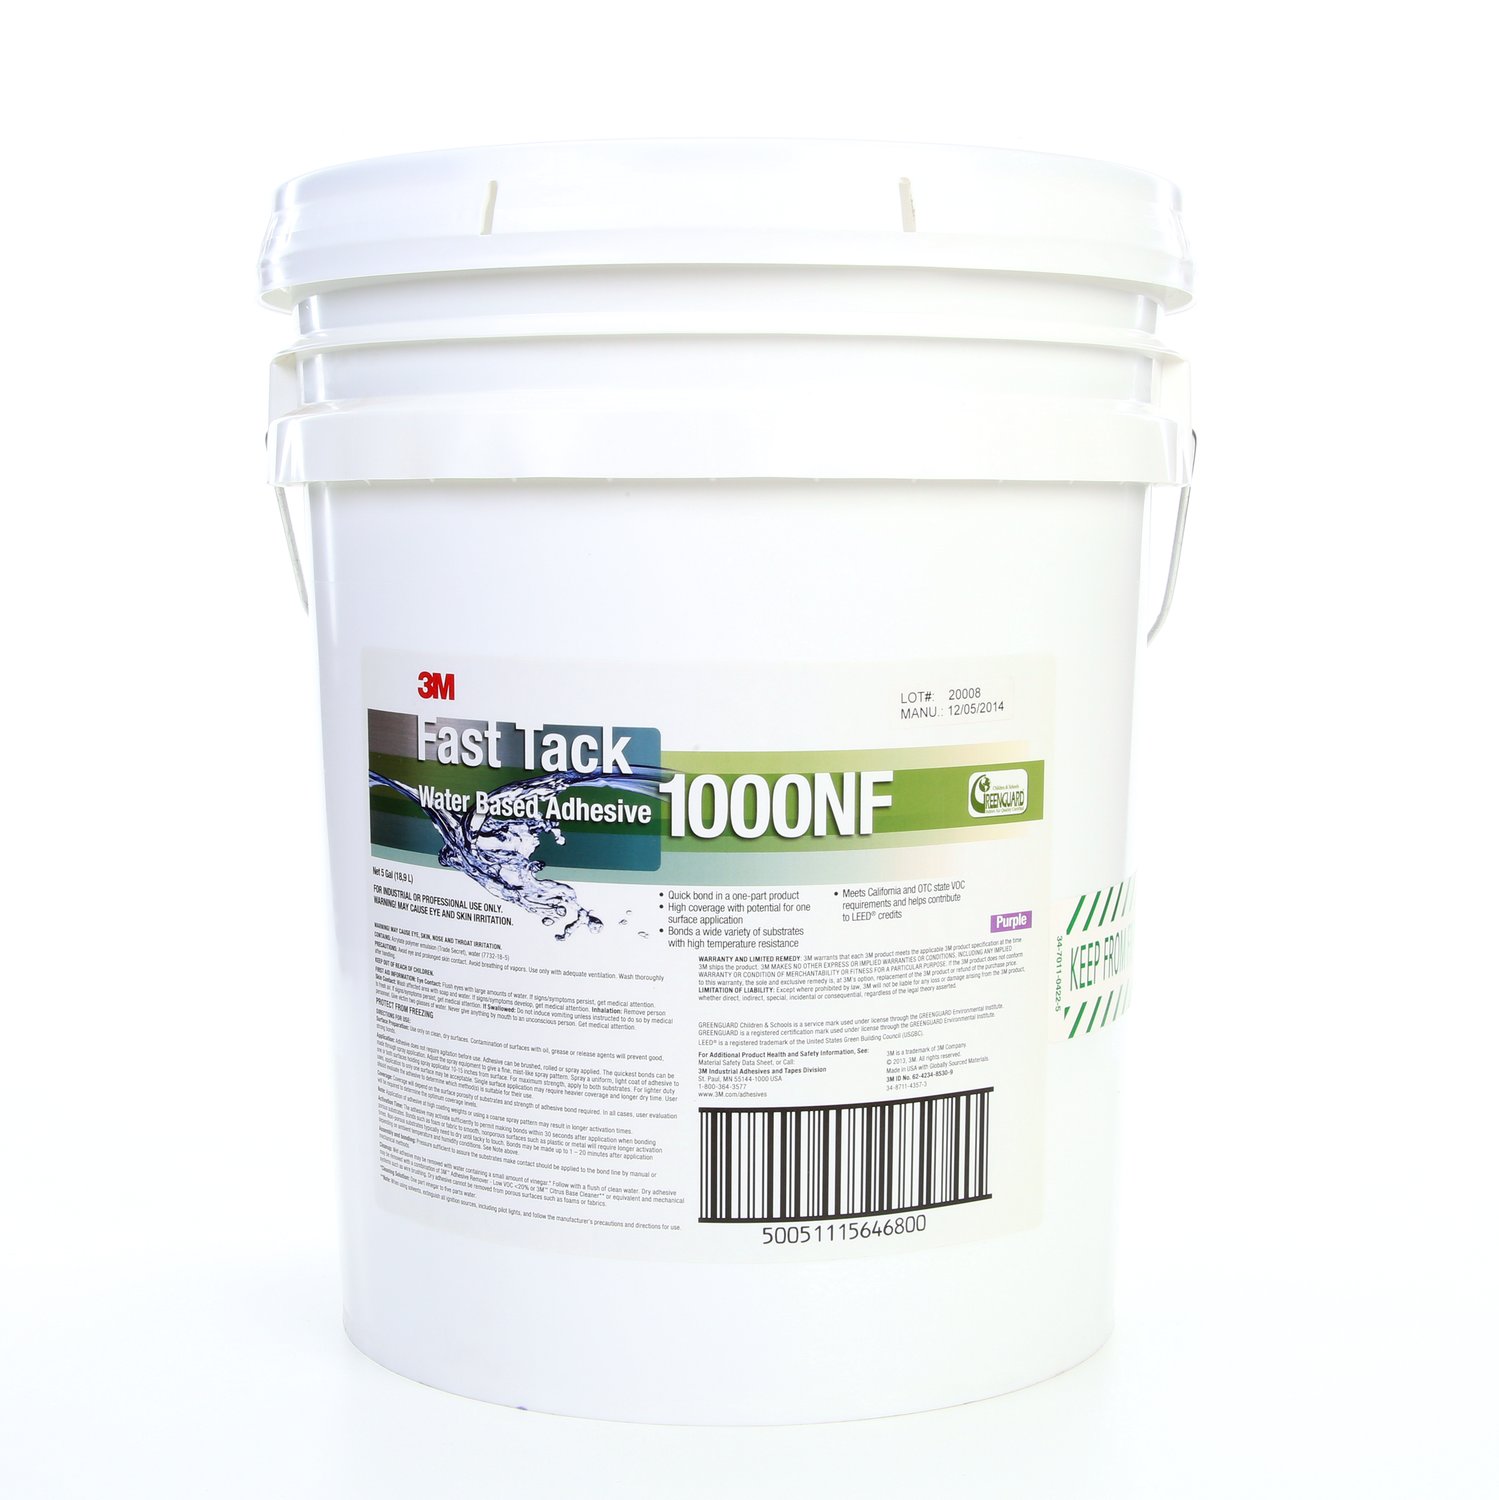 7000046563 - 3M Fast Tack Water Based Adhesive 1000NF, Purple, 5 Gallon, Case